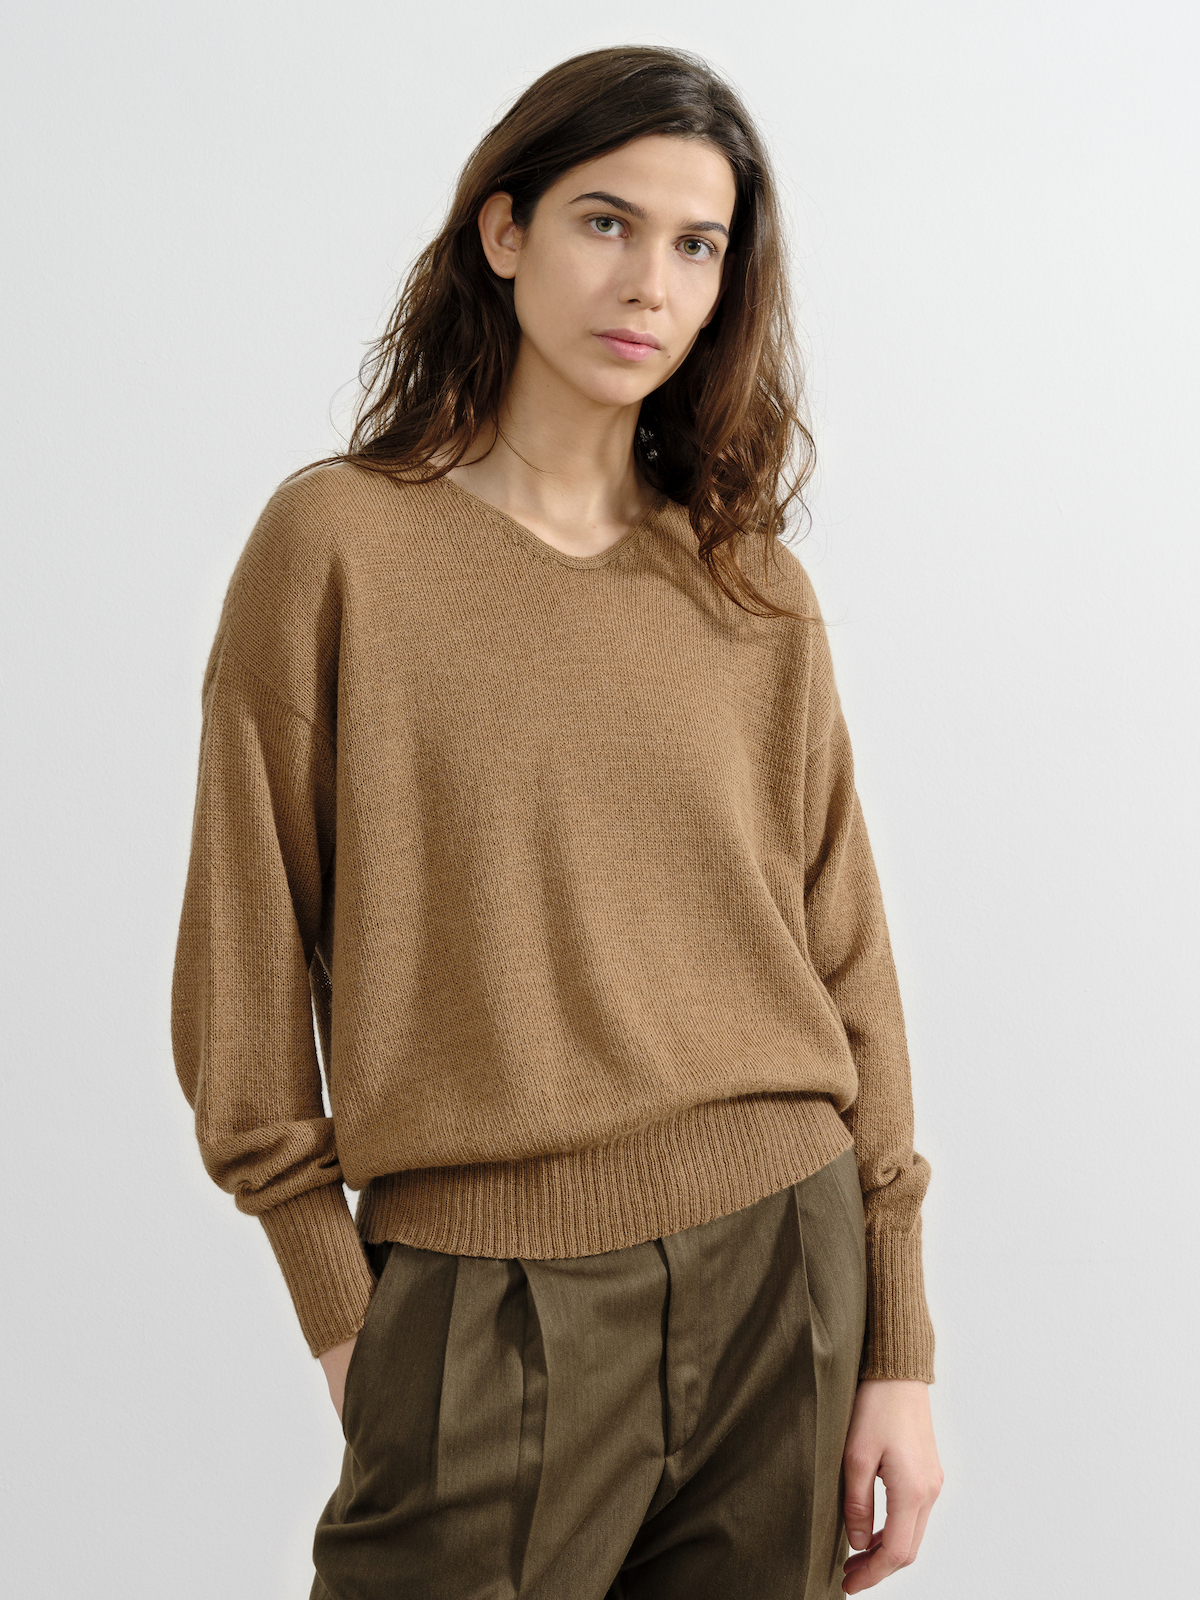 the Roll-edge in Natural Camel | by Knitbrary